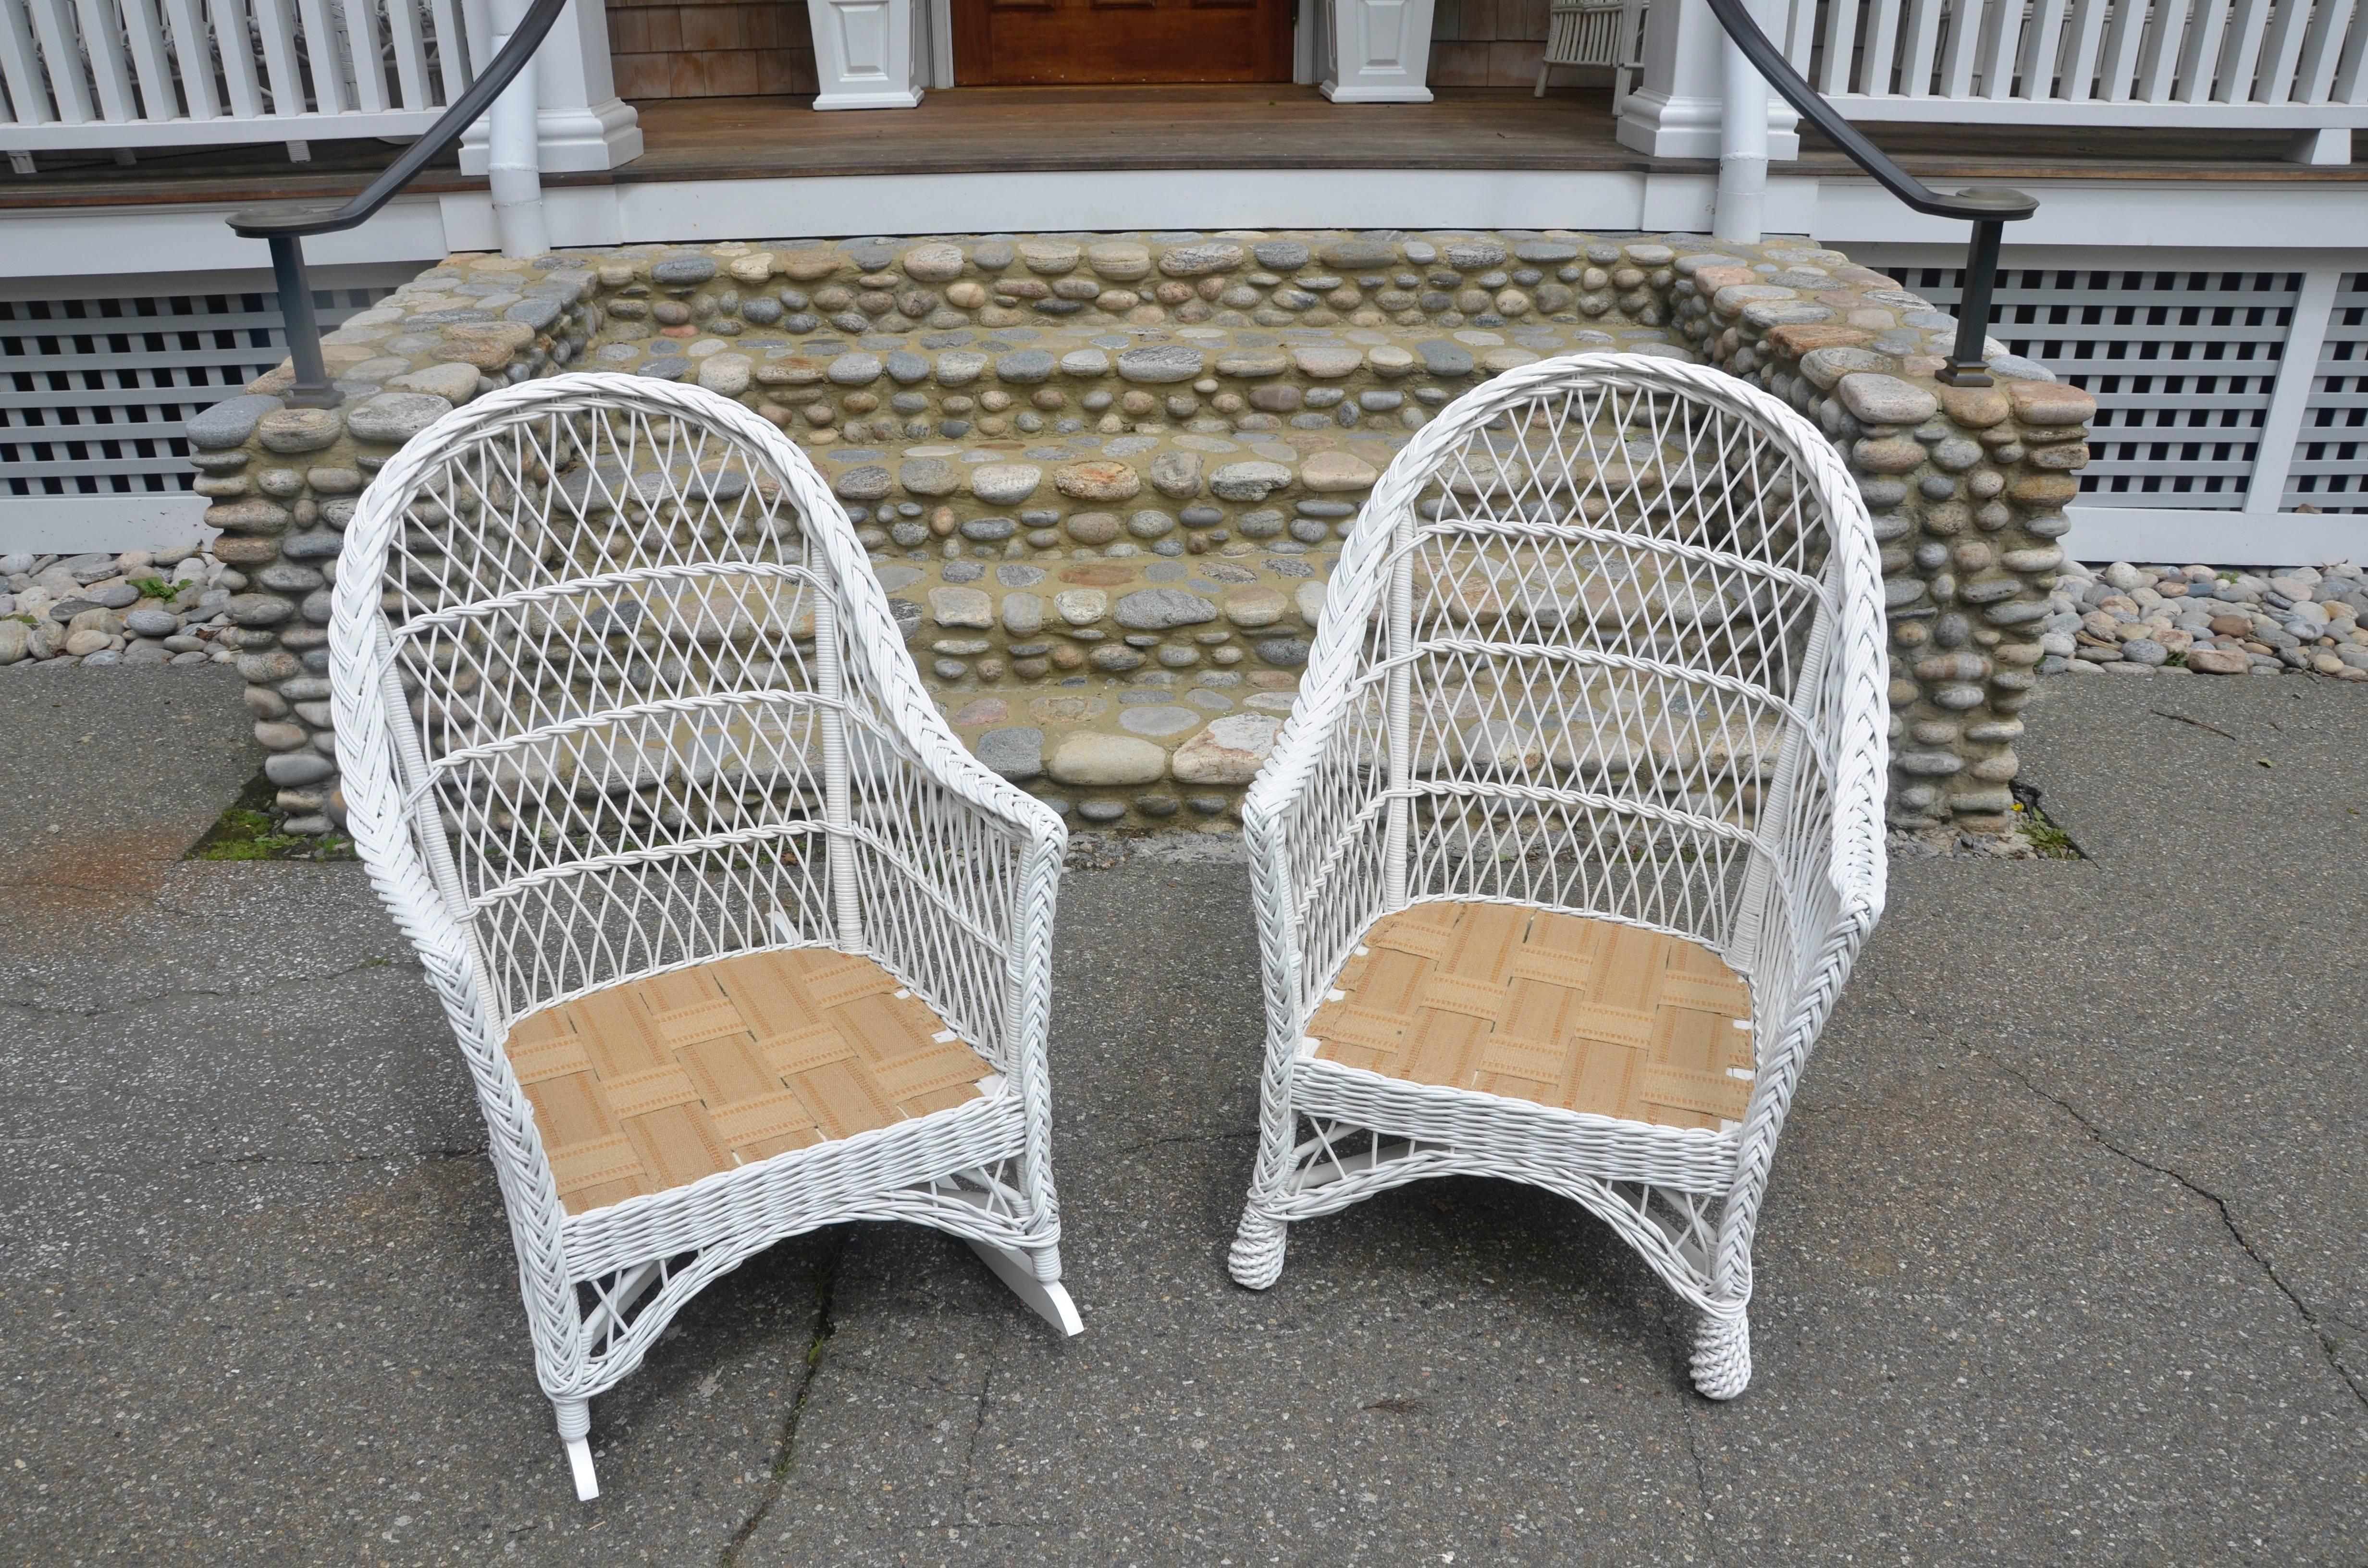 Bar Harbor wicker chair and rocker freshly painted and ready for cushions. Narrow arm allows chairs to fit in tight spaces.
Chair measures: 28